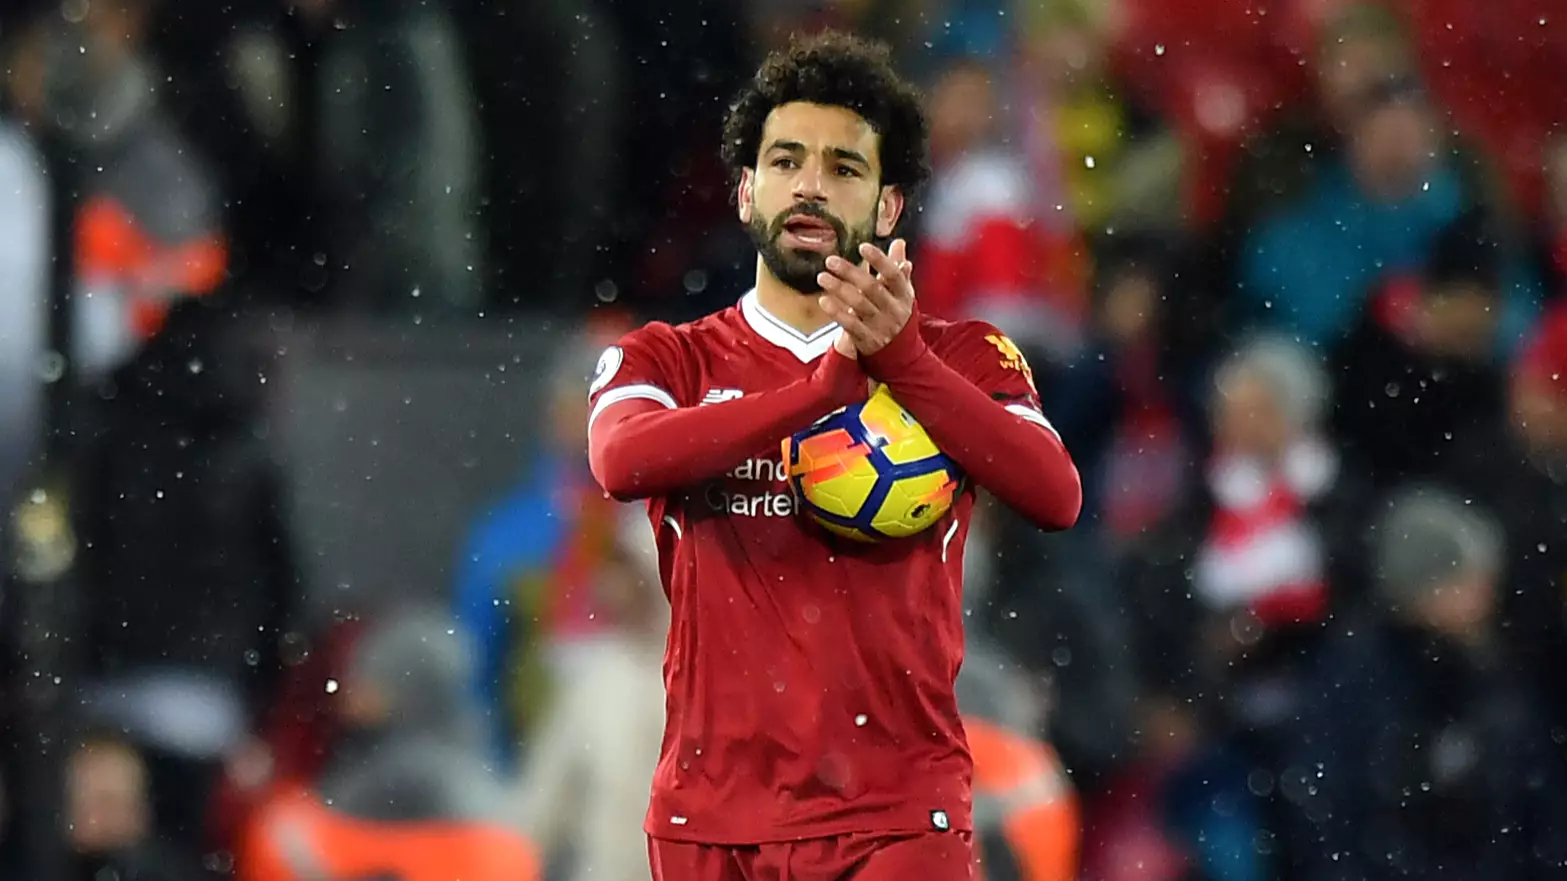 Egyptian Phone Company Offer Great Mo Salah Related Deal